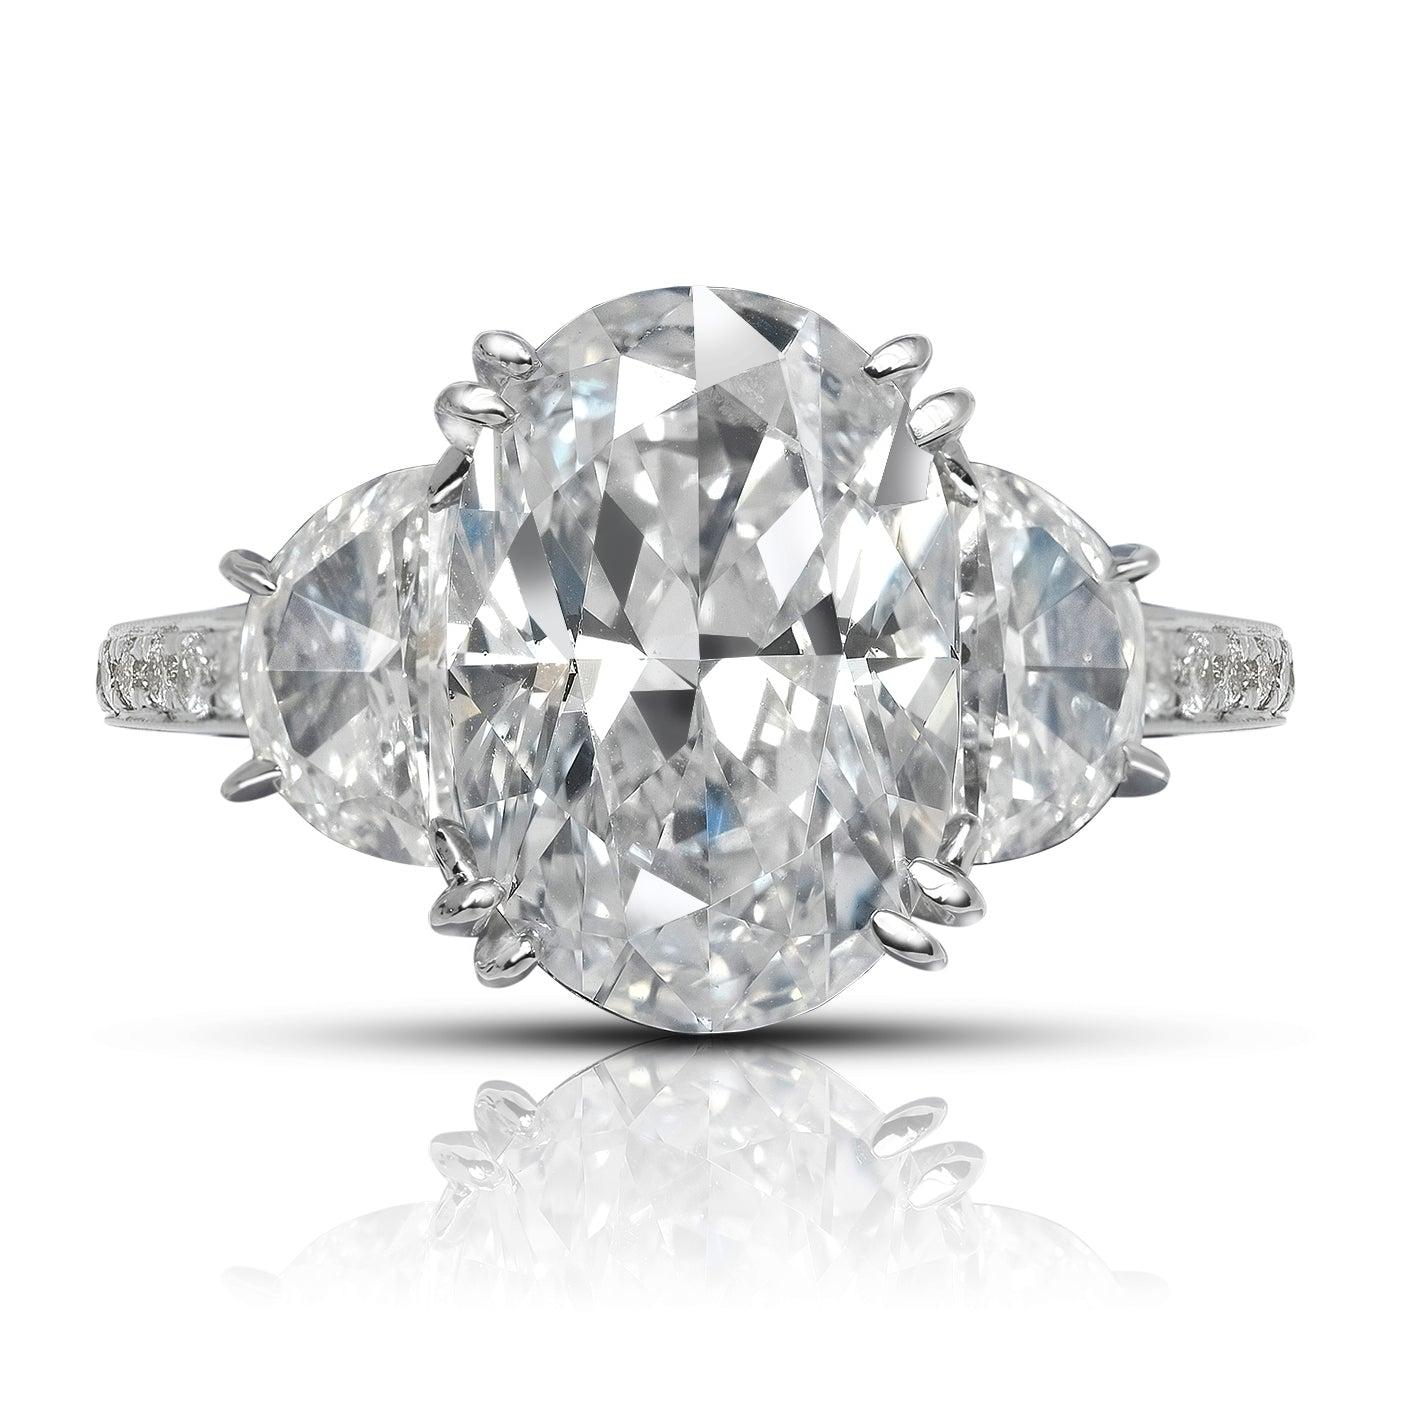 EMMA DIAMOND ENGAGEMENT PLATINUM RING BY MIKE NEKTA
GIA CERTIFIED

Center Diamond:
Carat Weight: 4 Carats
Color: E*
Clarity: VVS1
Style:  OVAL BRILLIANT
Measurements: 12.2 x 8.4 x 5.3 mm
*Treated Color
Ring:

Metal: PLATINIUM
Style: Three Stone Half